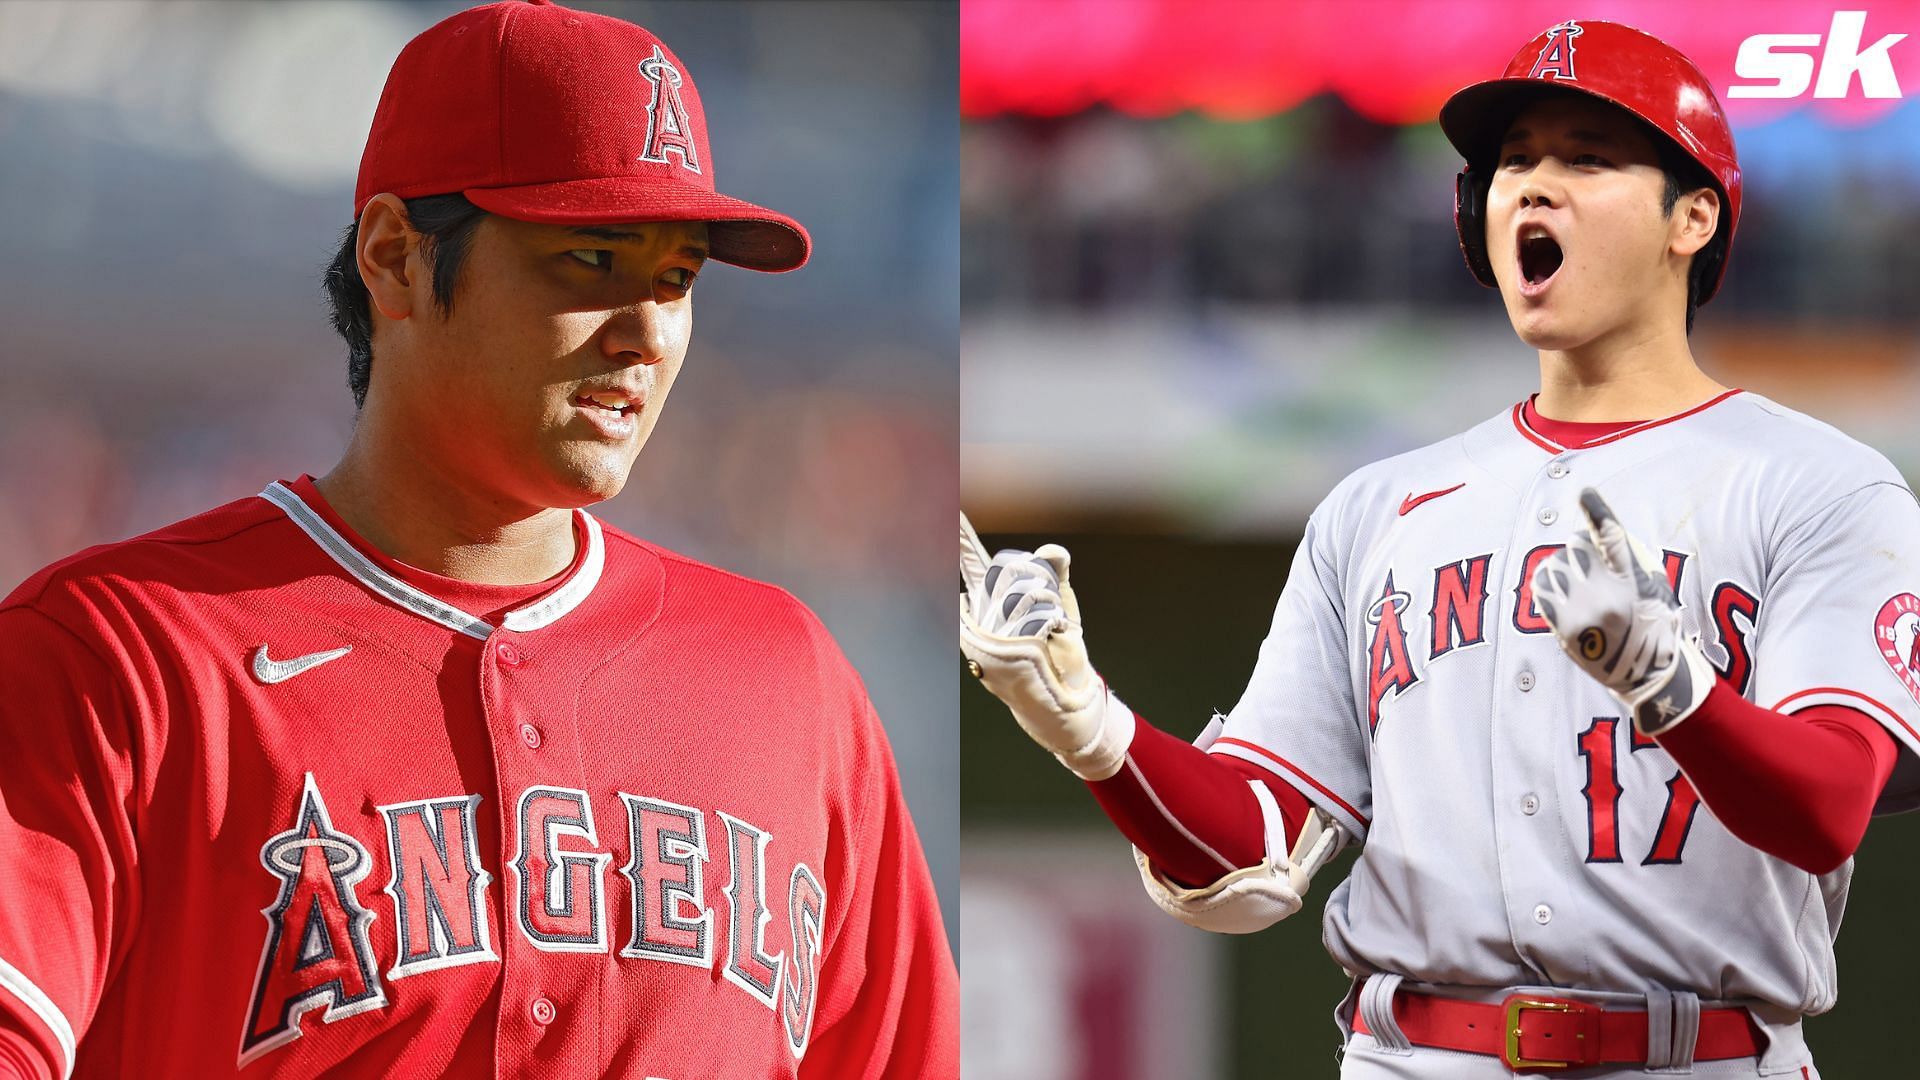 Ohtani becomes 1st in MLB history with 10 wins, 40 HRs in season